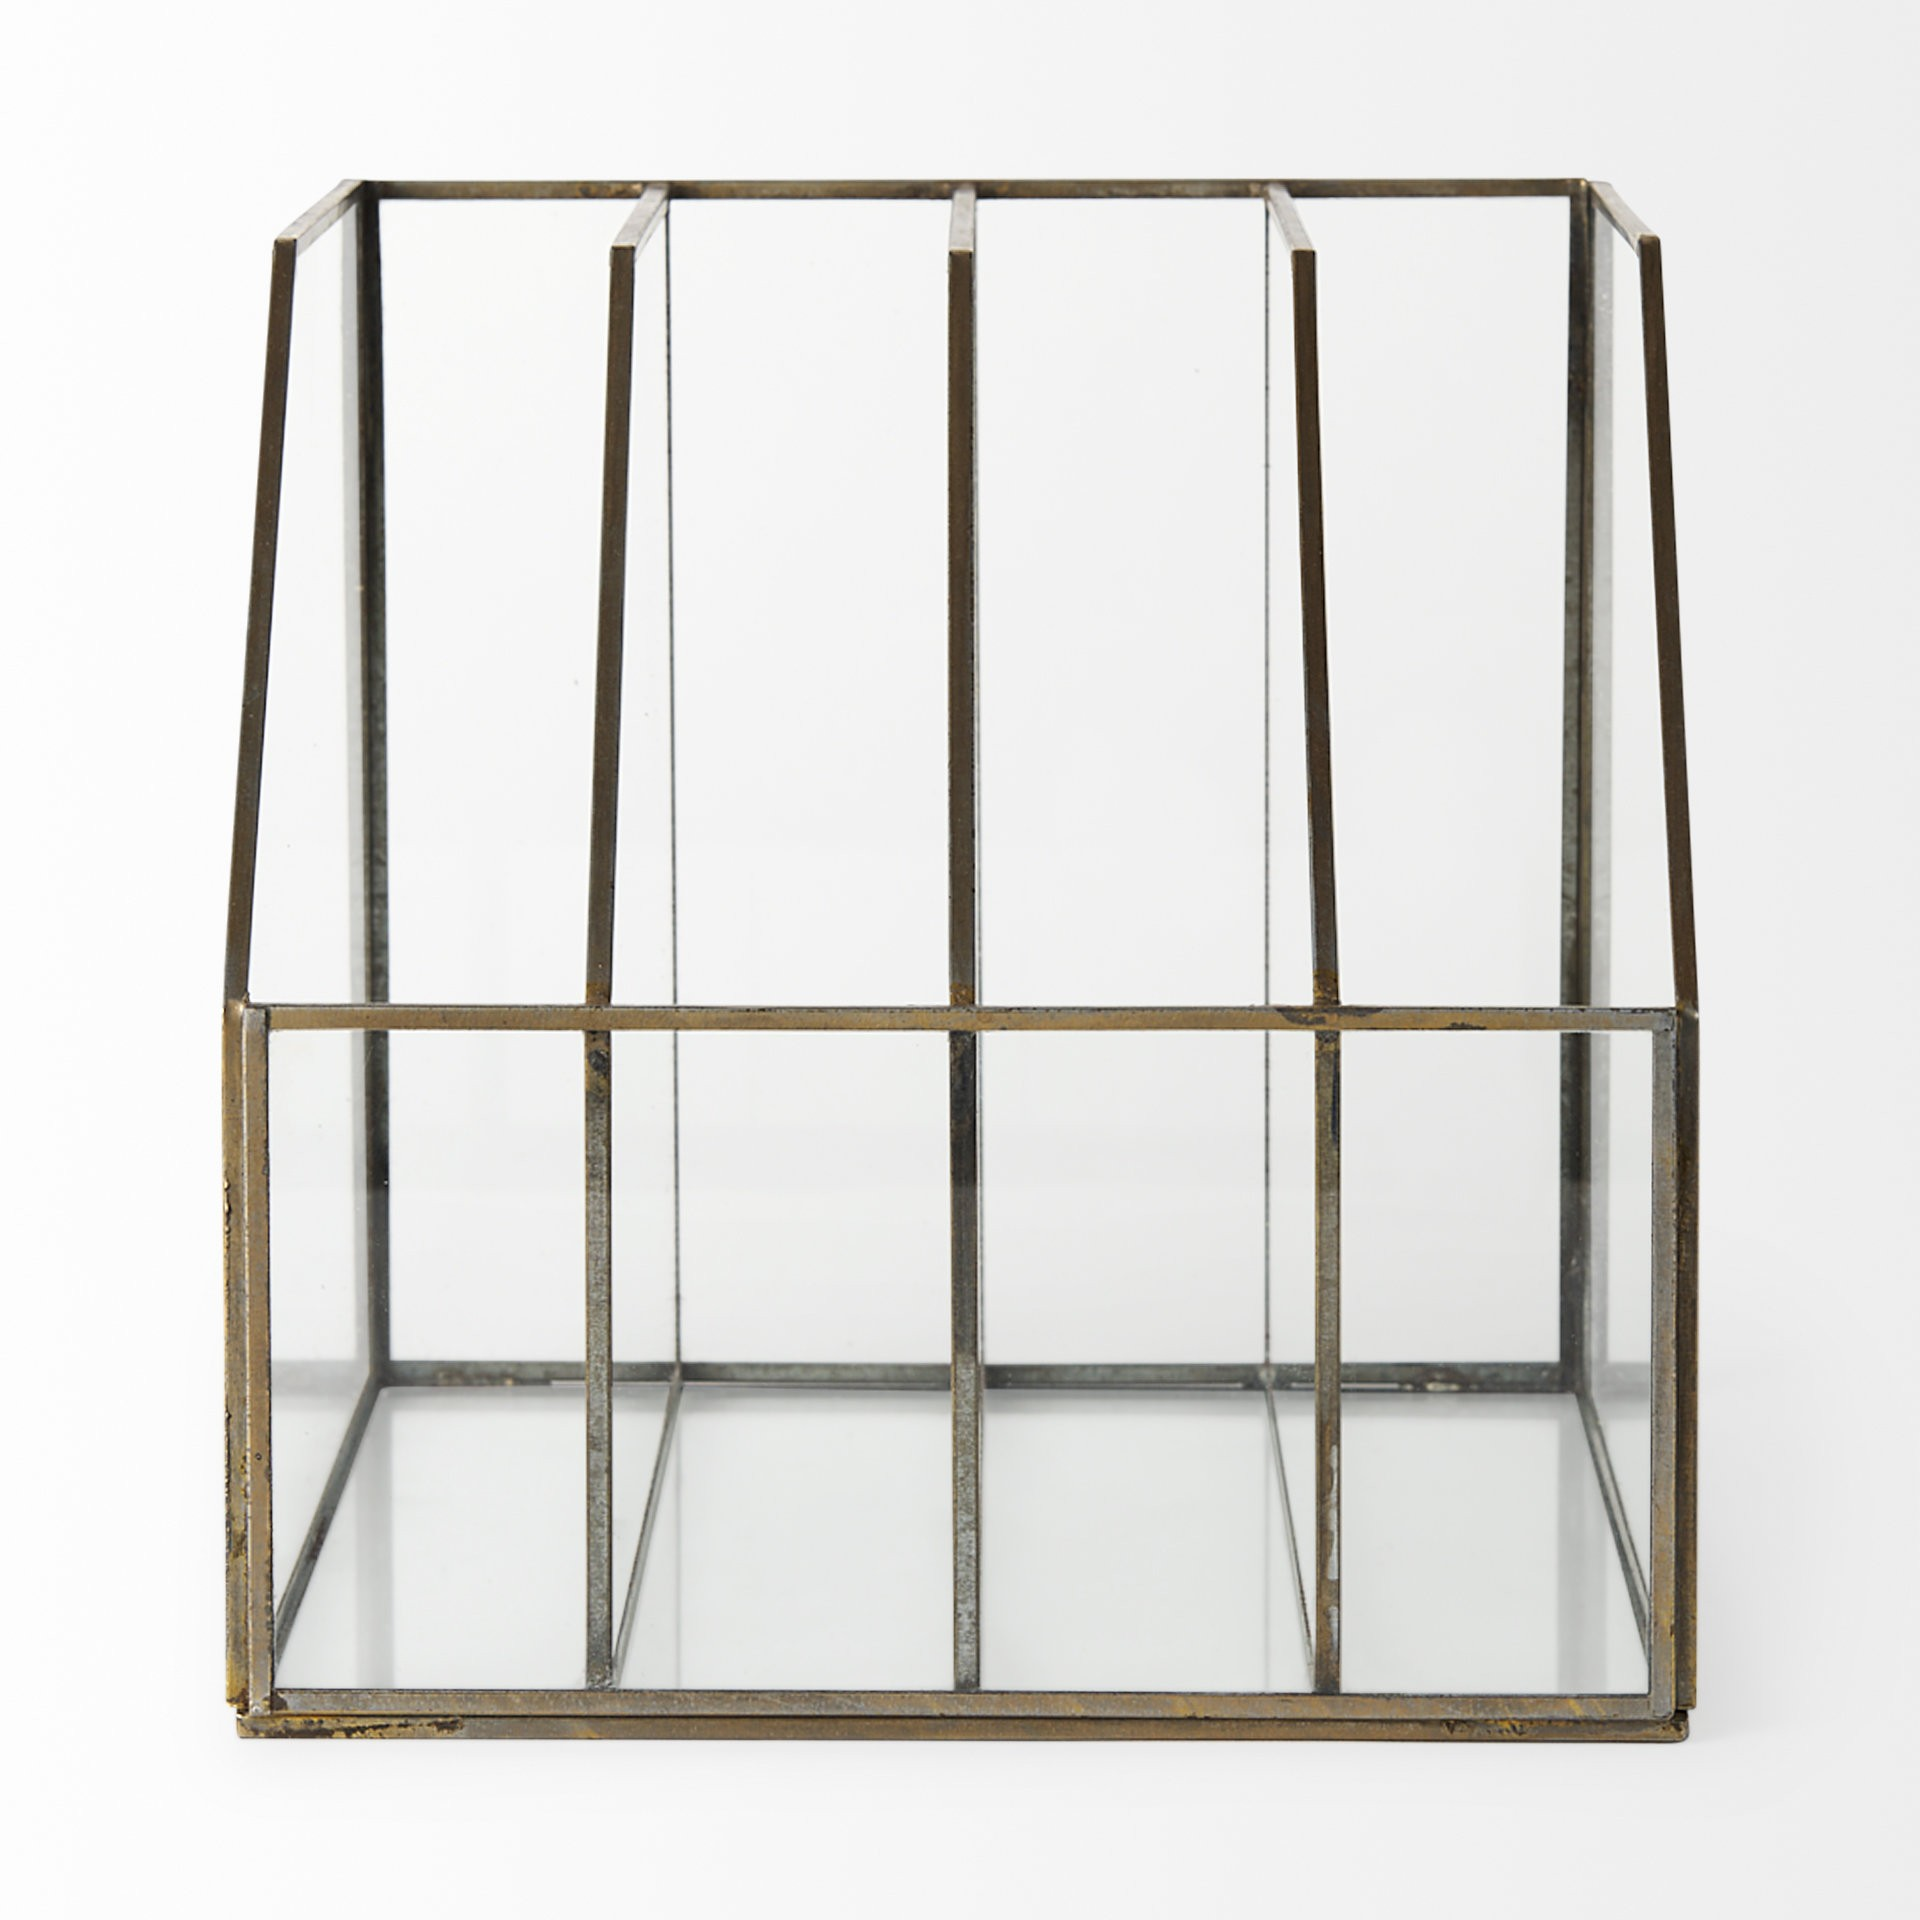 Modern Rustic Gold Metal And Glass File Holder - Higher Gallery